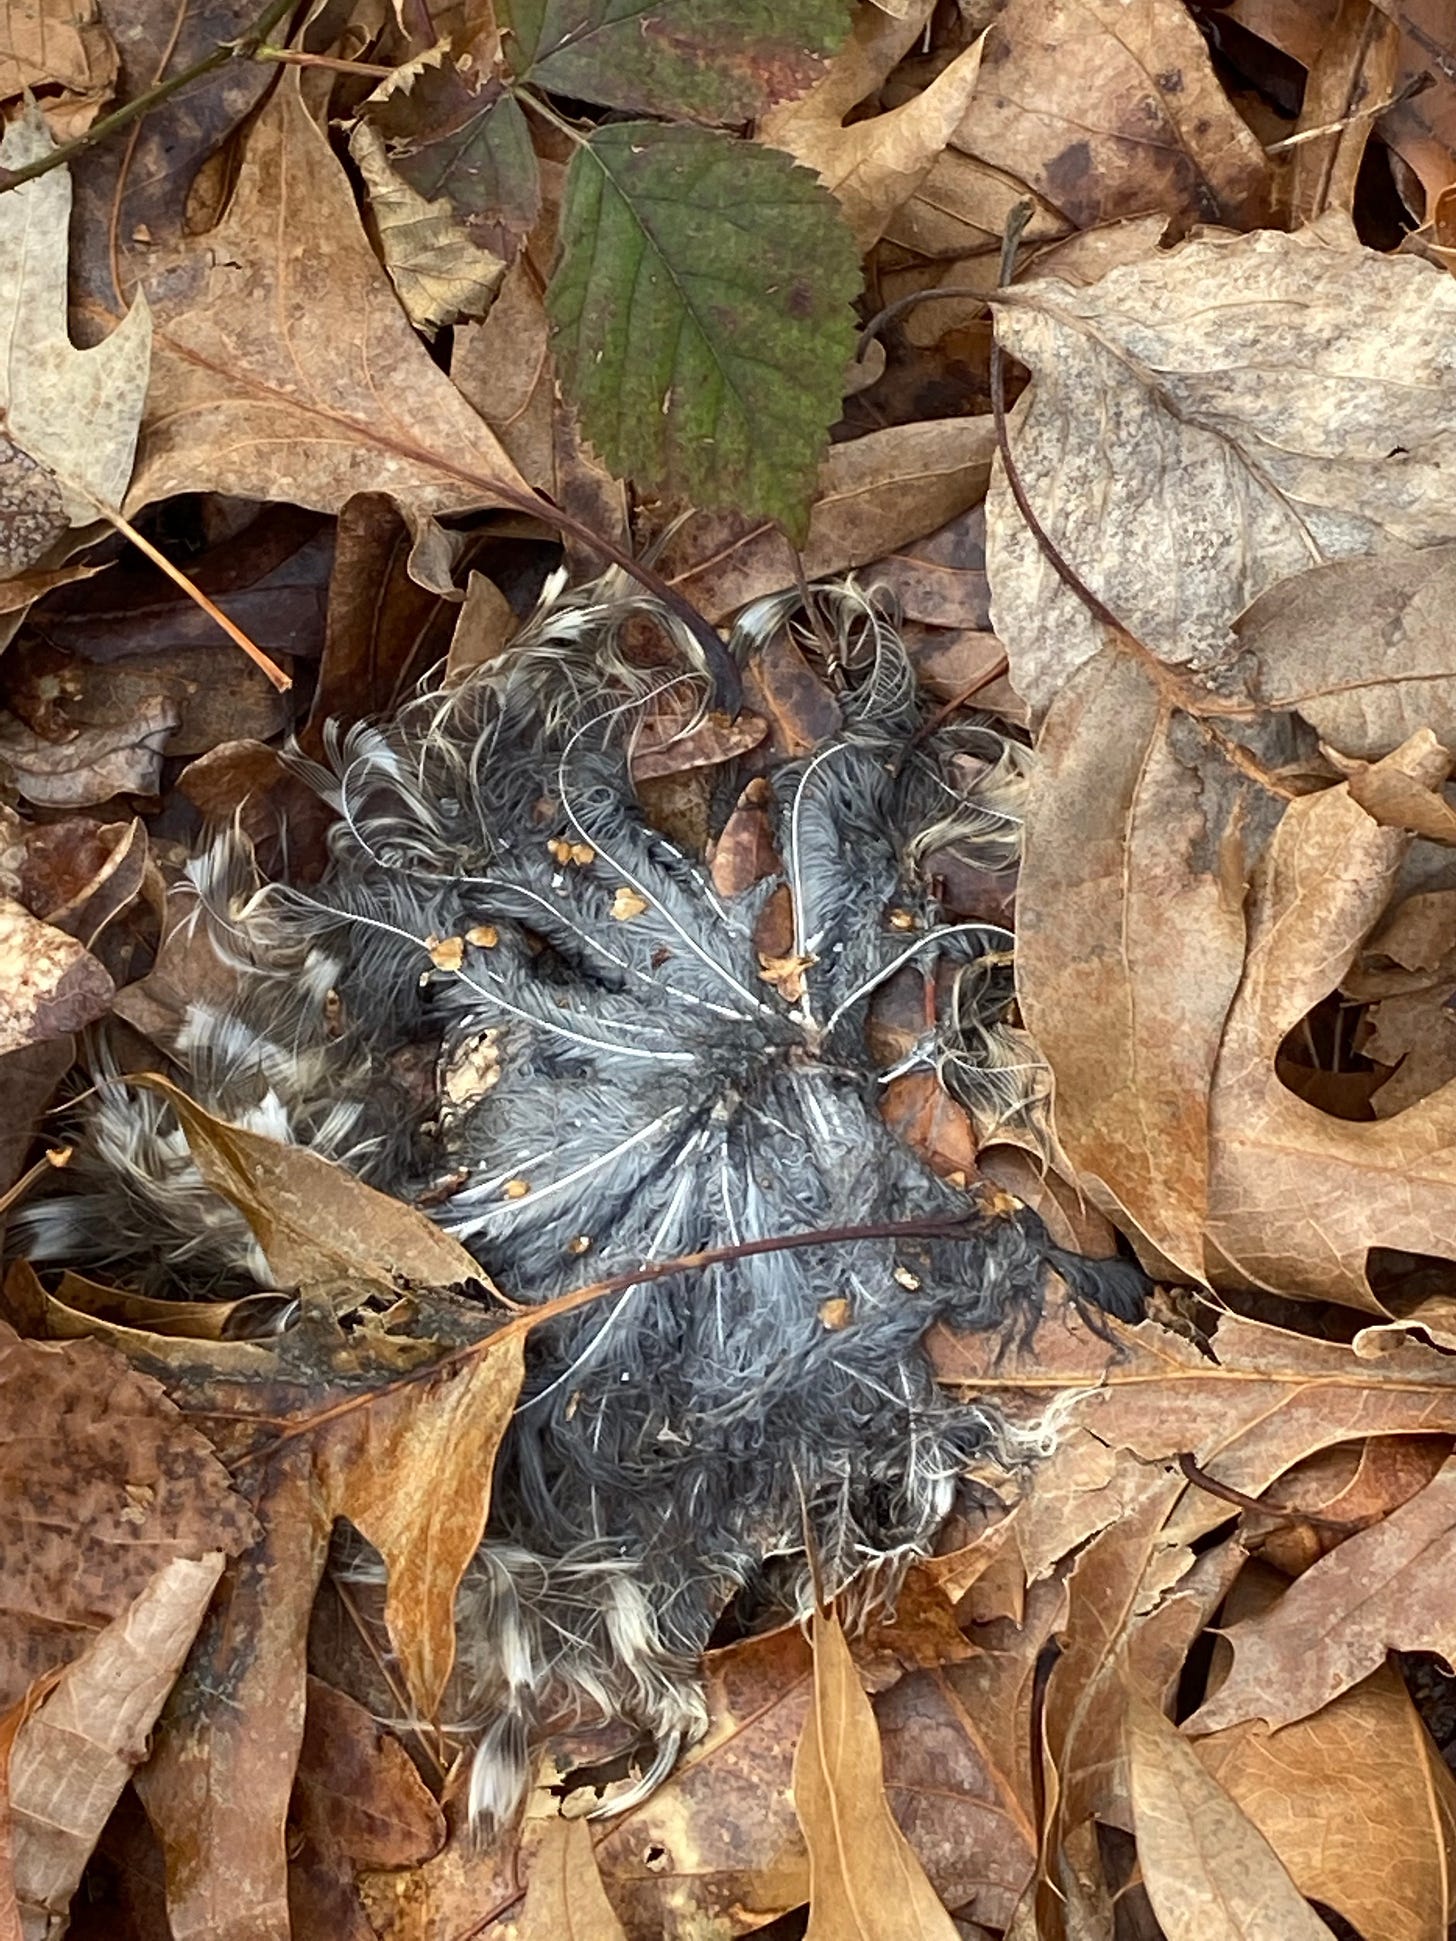 A clump of gray, brown and white feathers, presumably barred owl feathers, lying in dead brown leaves